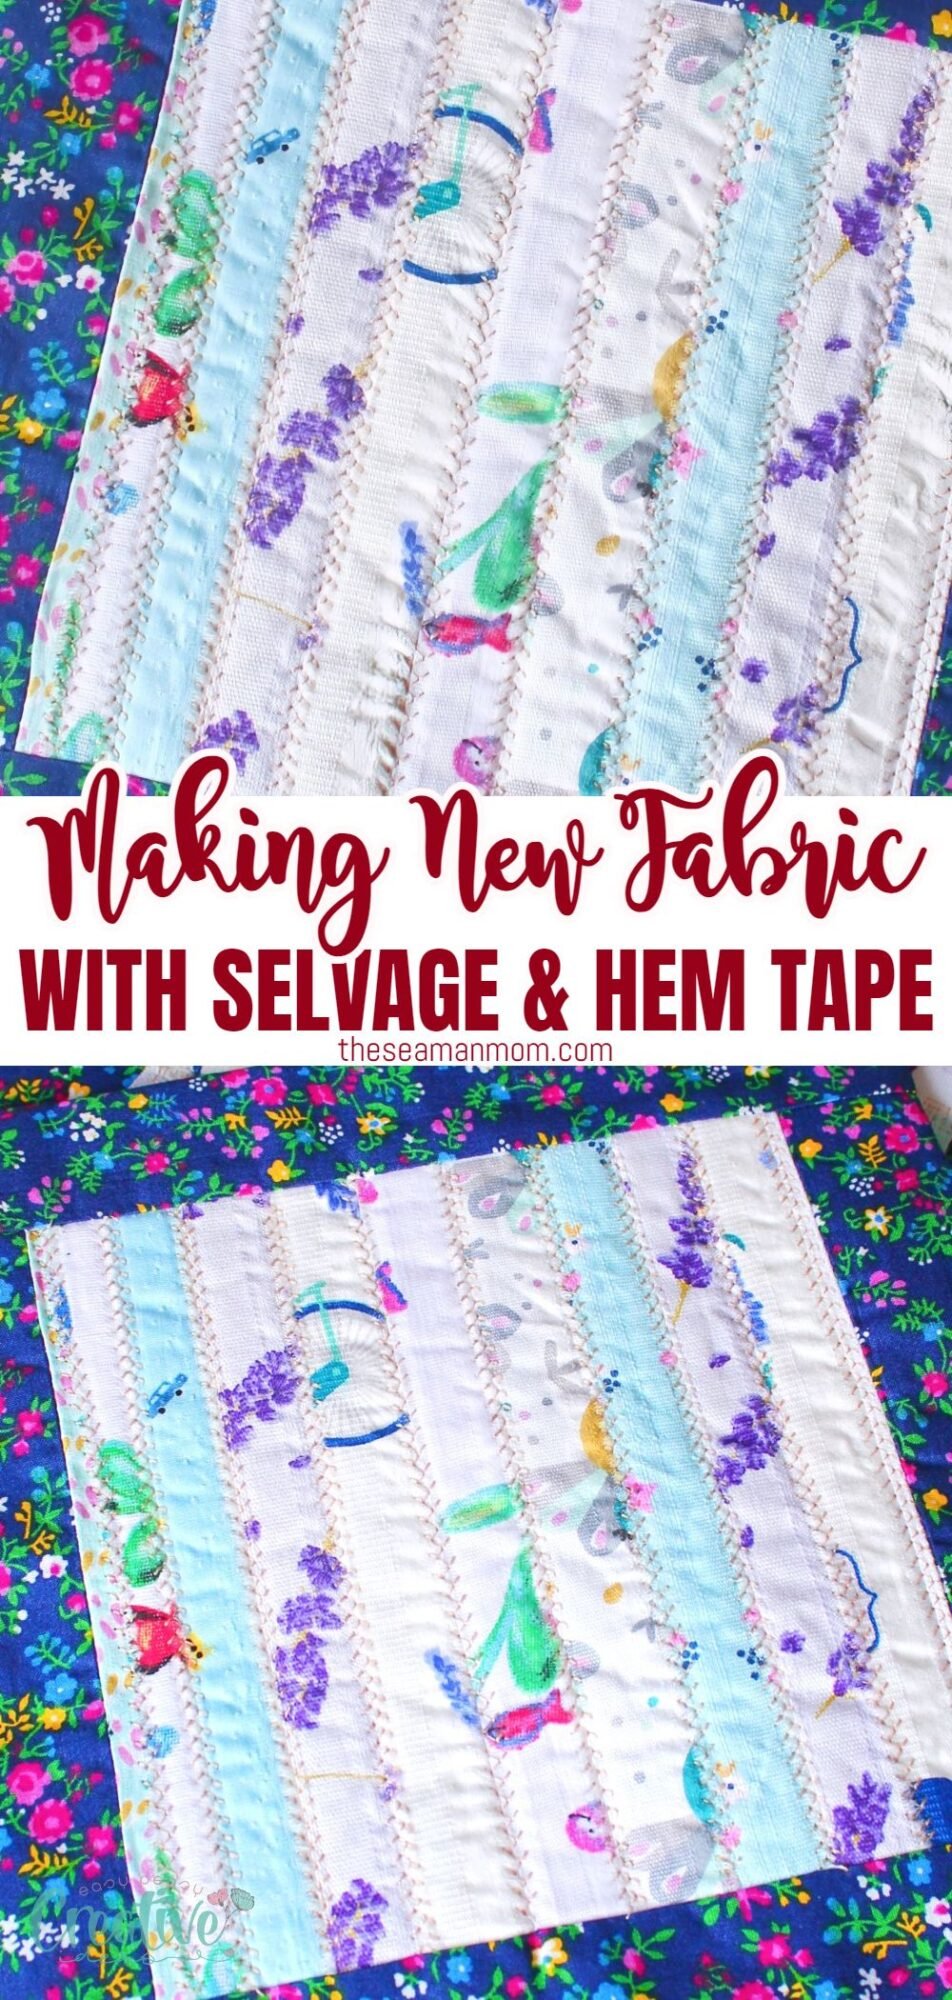 Learn how to make fabric with selvage & hemming tape. Transform scraps into beautiful, unique pieces reflecting your style!